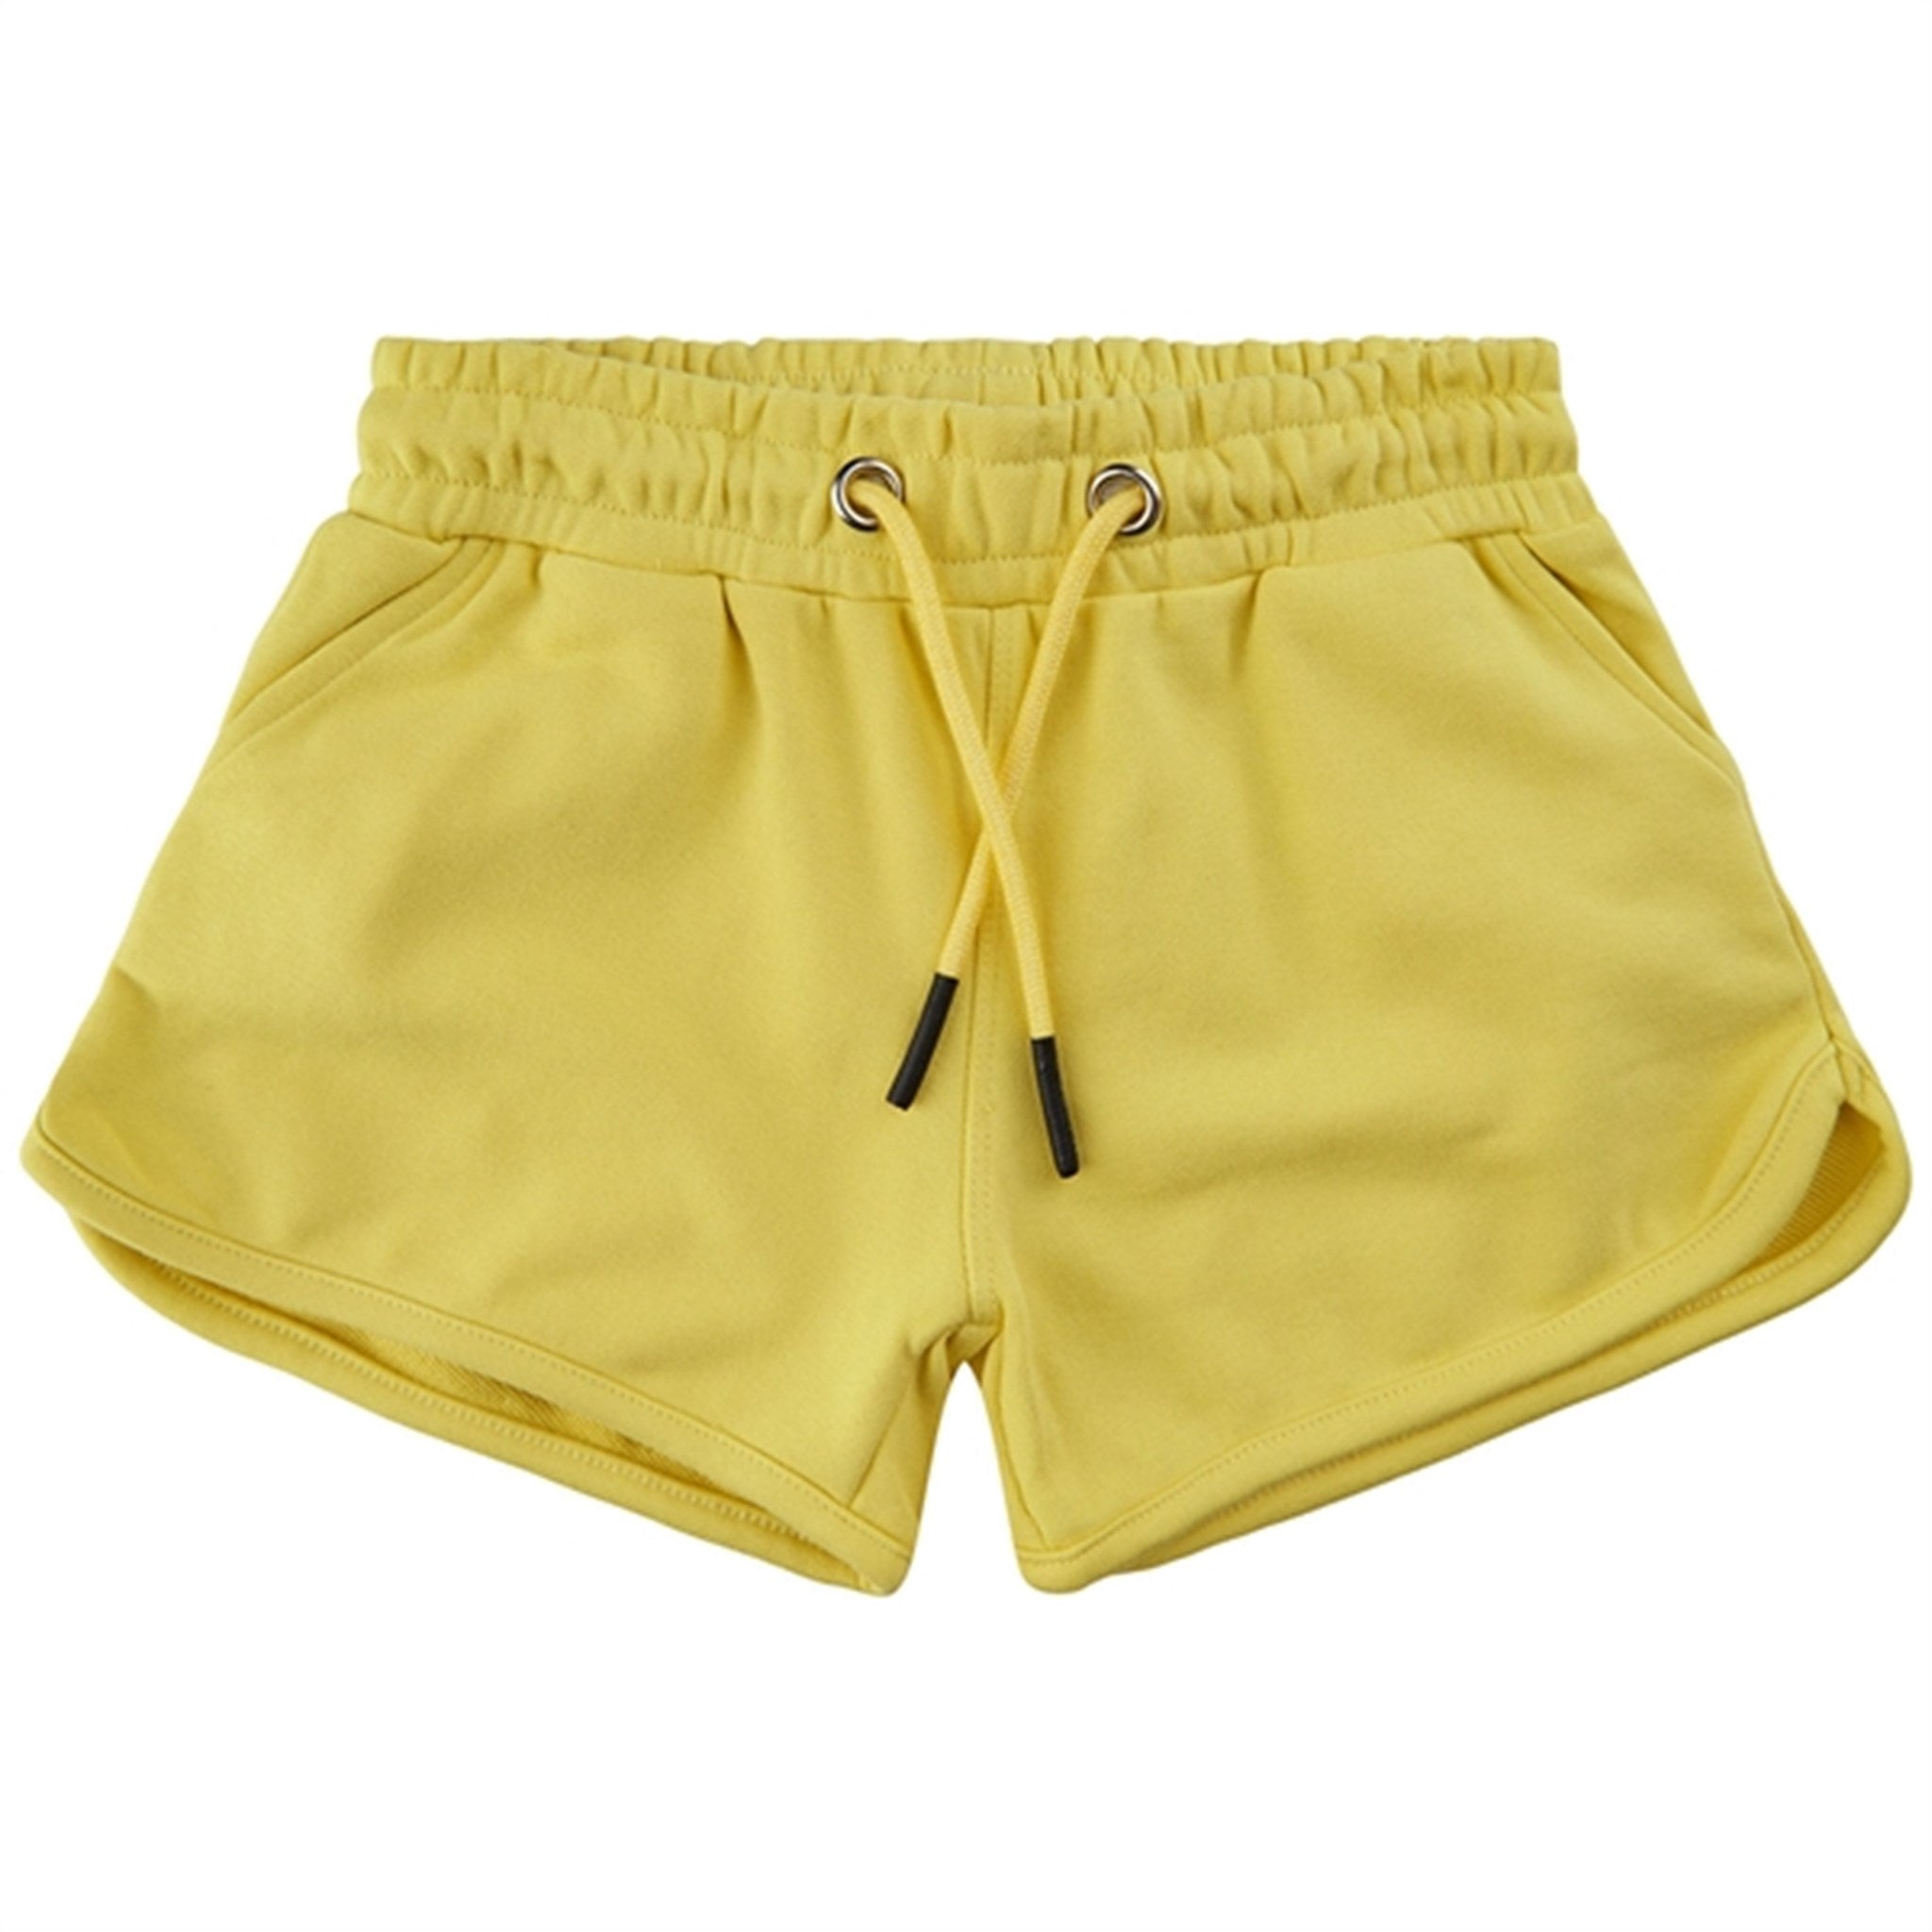 The New Canary Yellow Chica Sweatshorts